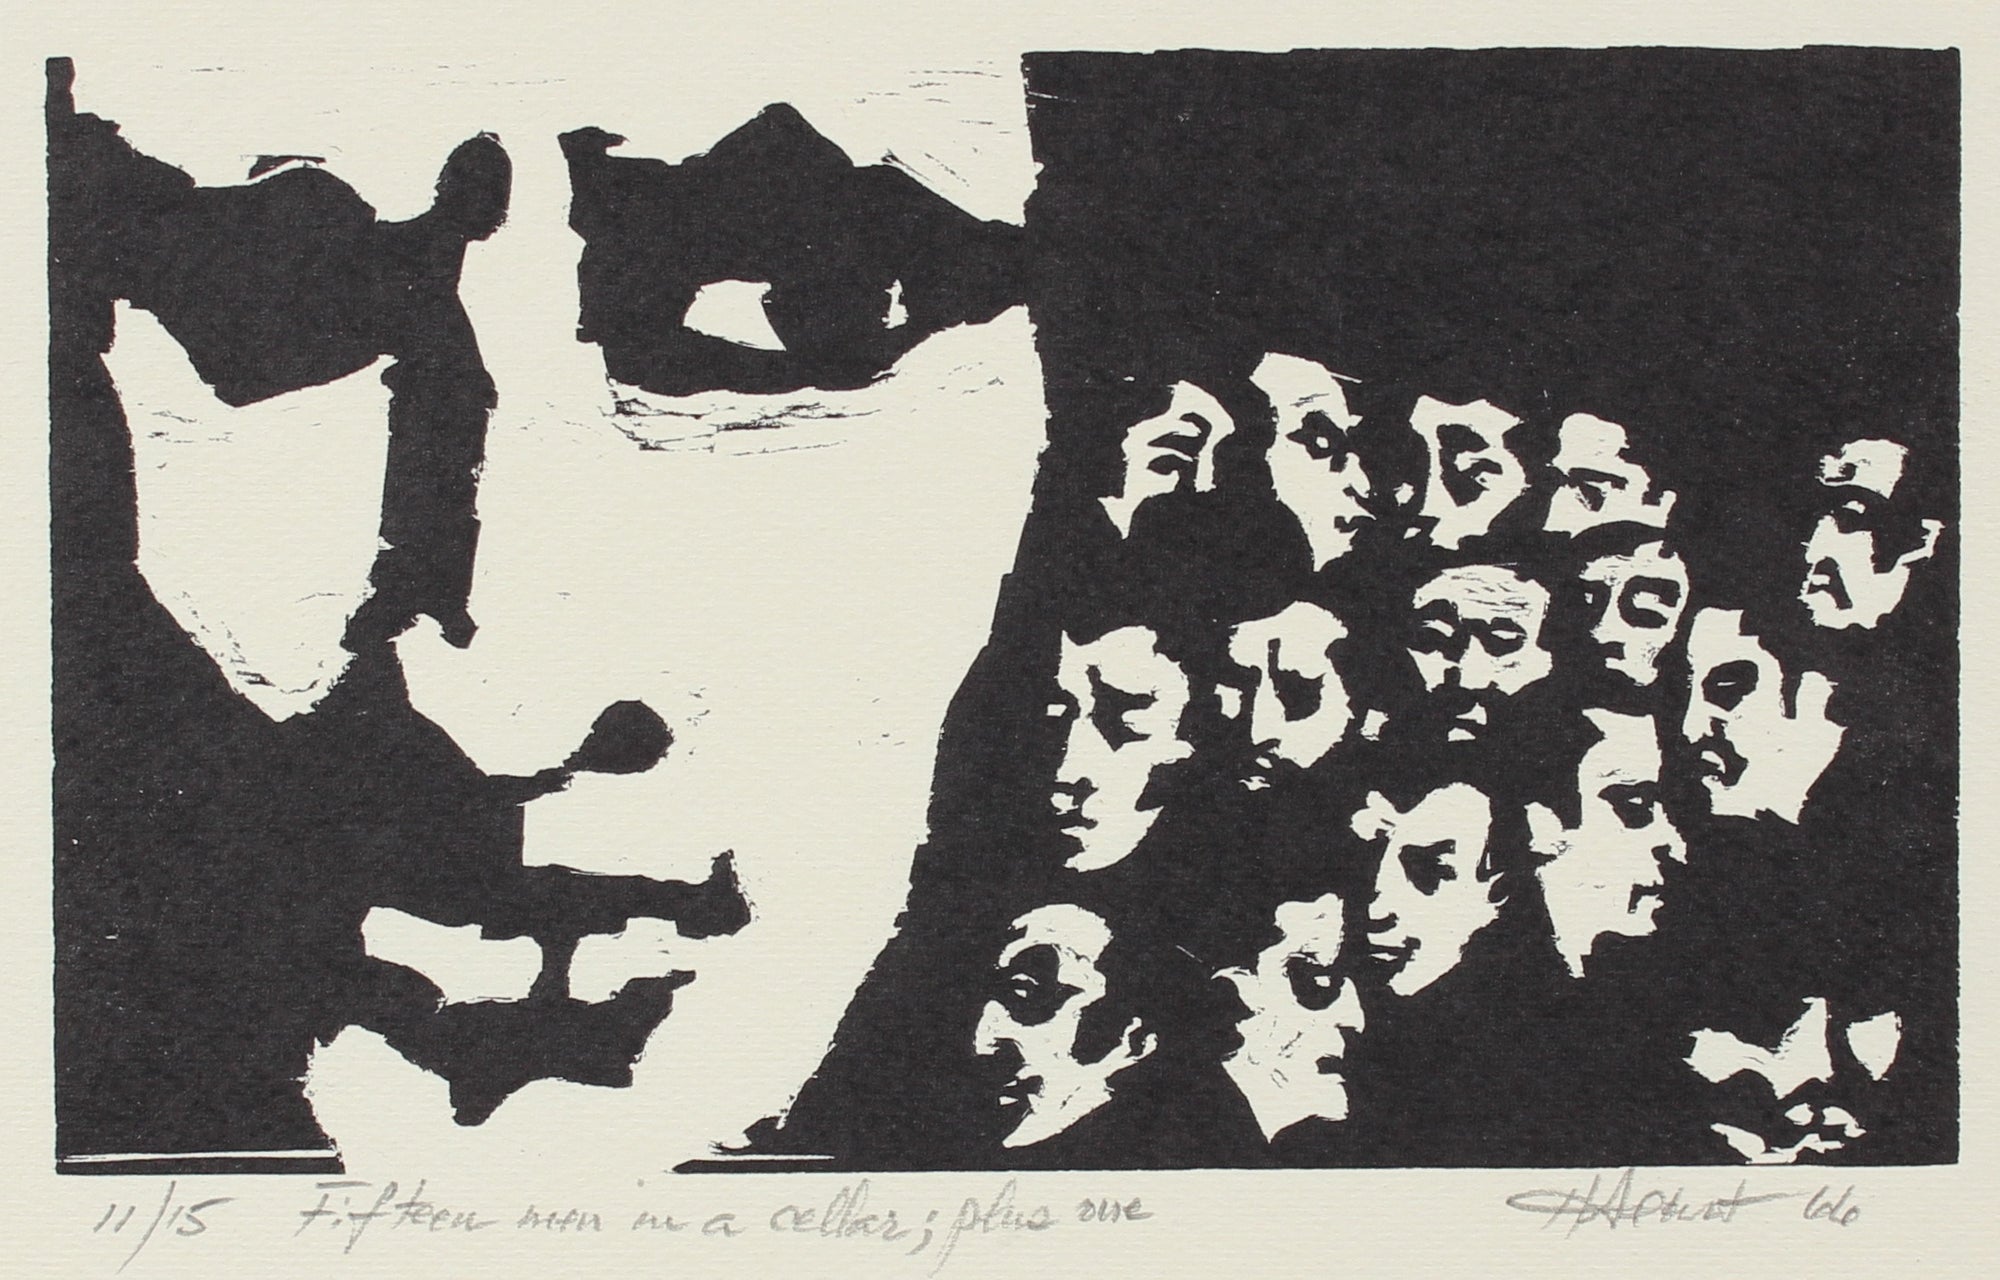 <i>Fifteen Men in a Cellar; Plus One</i><br>Woodcut, 1966<br><br>#2147A